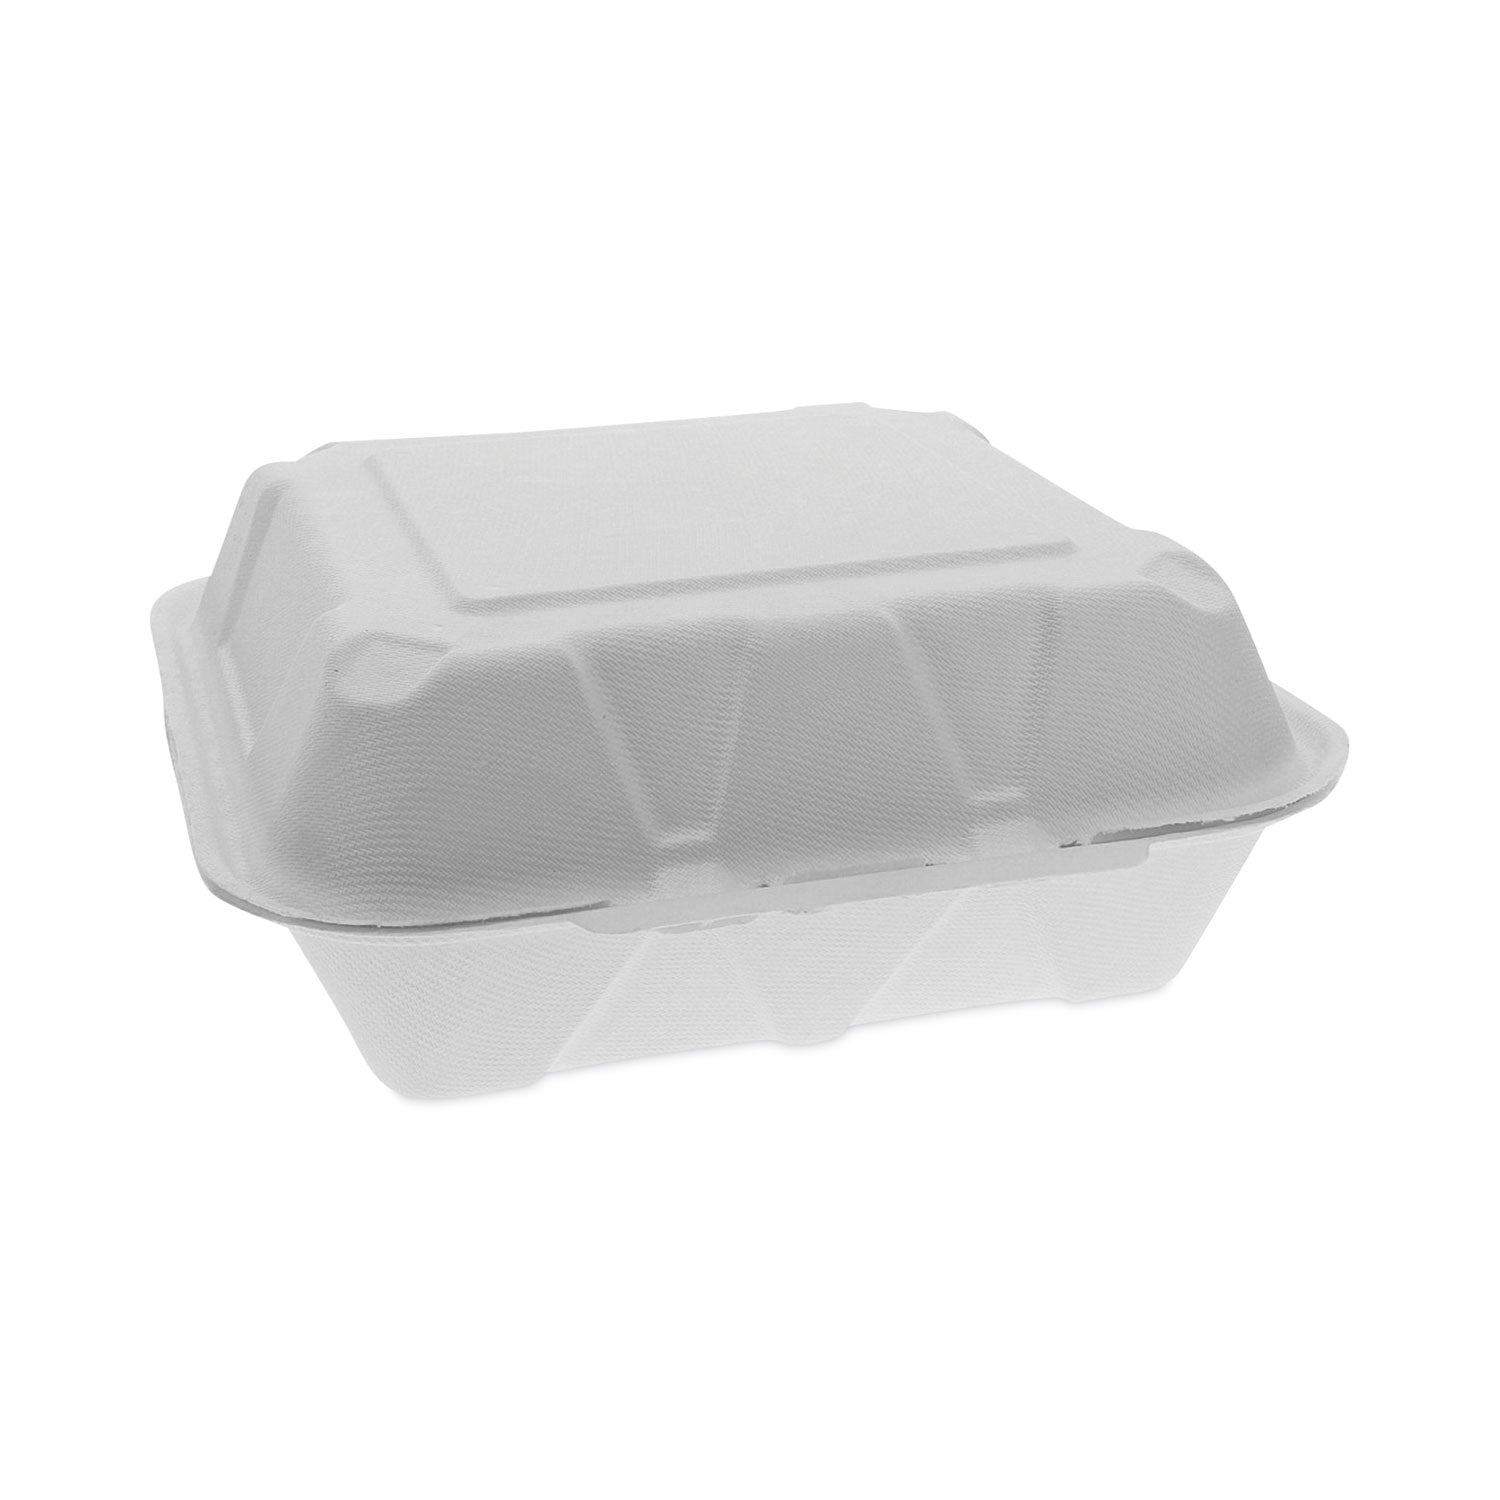 earthchoice-bagasse-hinged-lid-container-dual-tab-lock-large-container-9-x-9-x-35-natural-sugarcane-150-carton_pctymch09010001 - 1